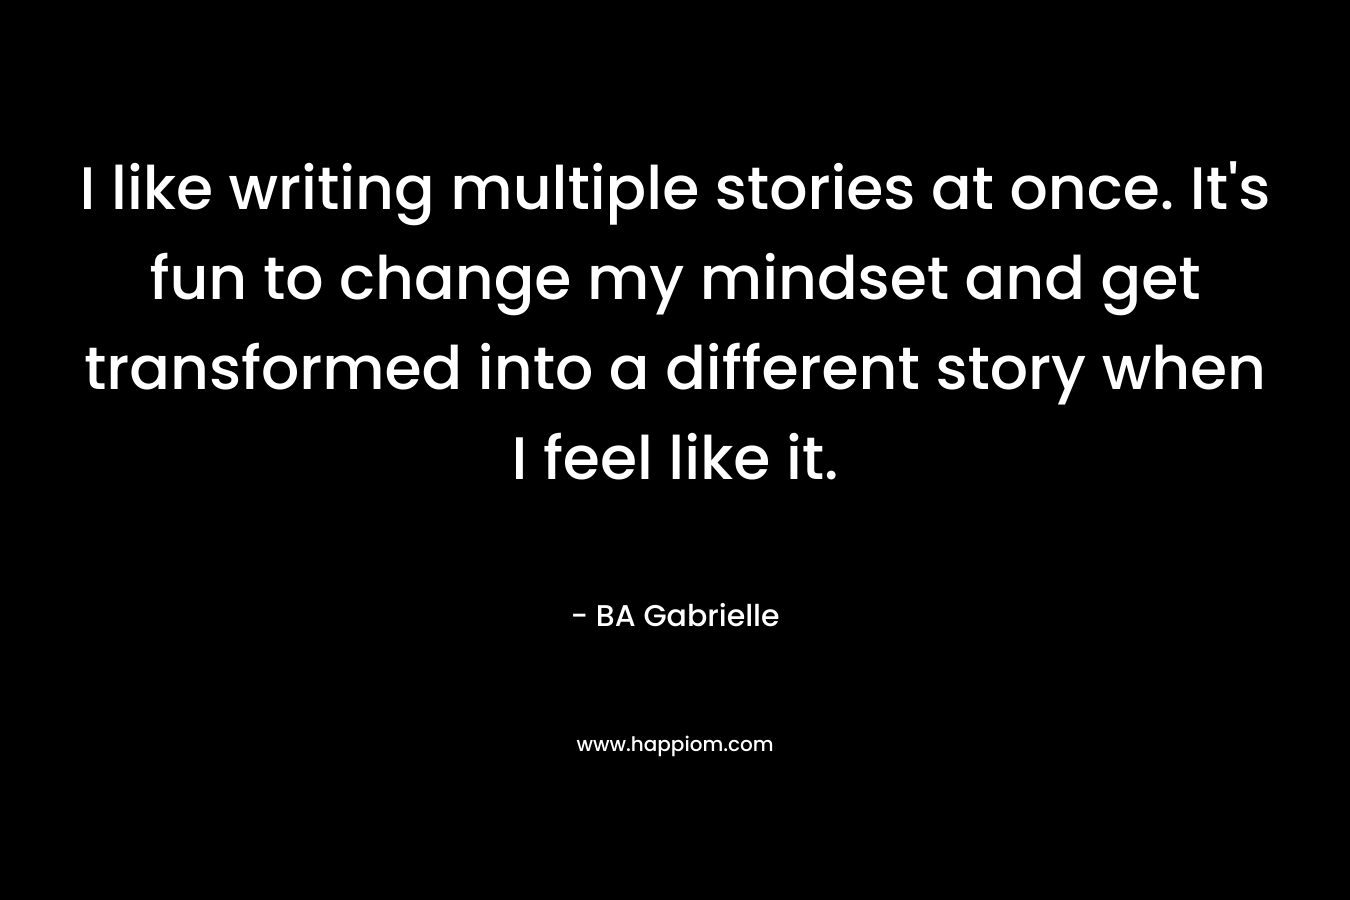 I like writing multiple stories at once. It’s fun to change my mindset and get transformed into a different story when I feel like it. – BA Gabrielle